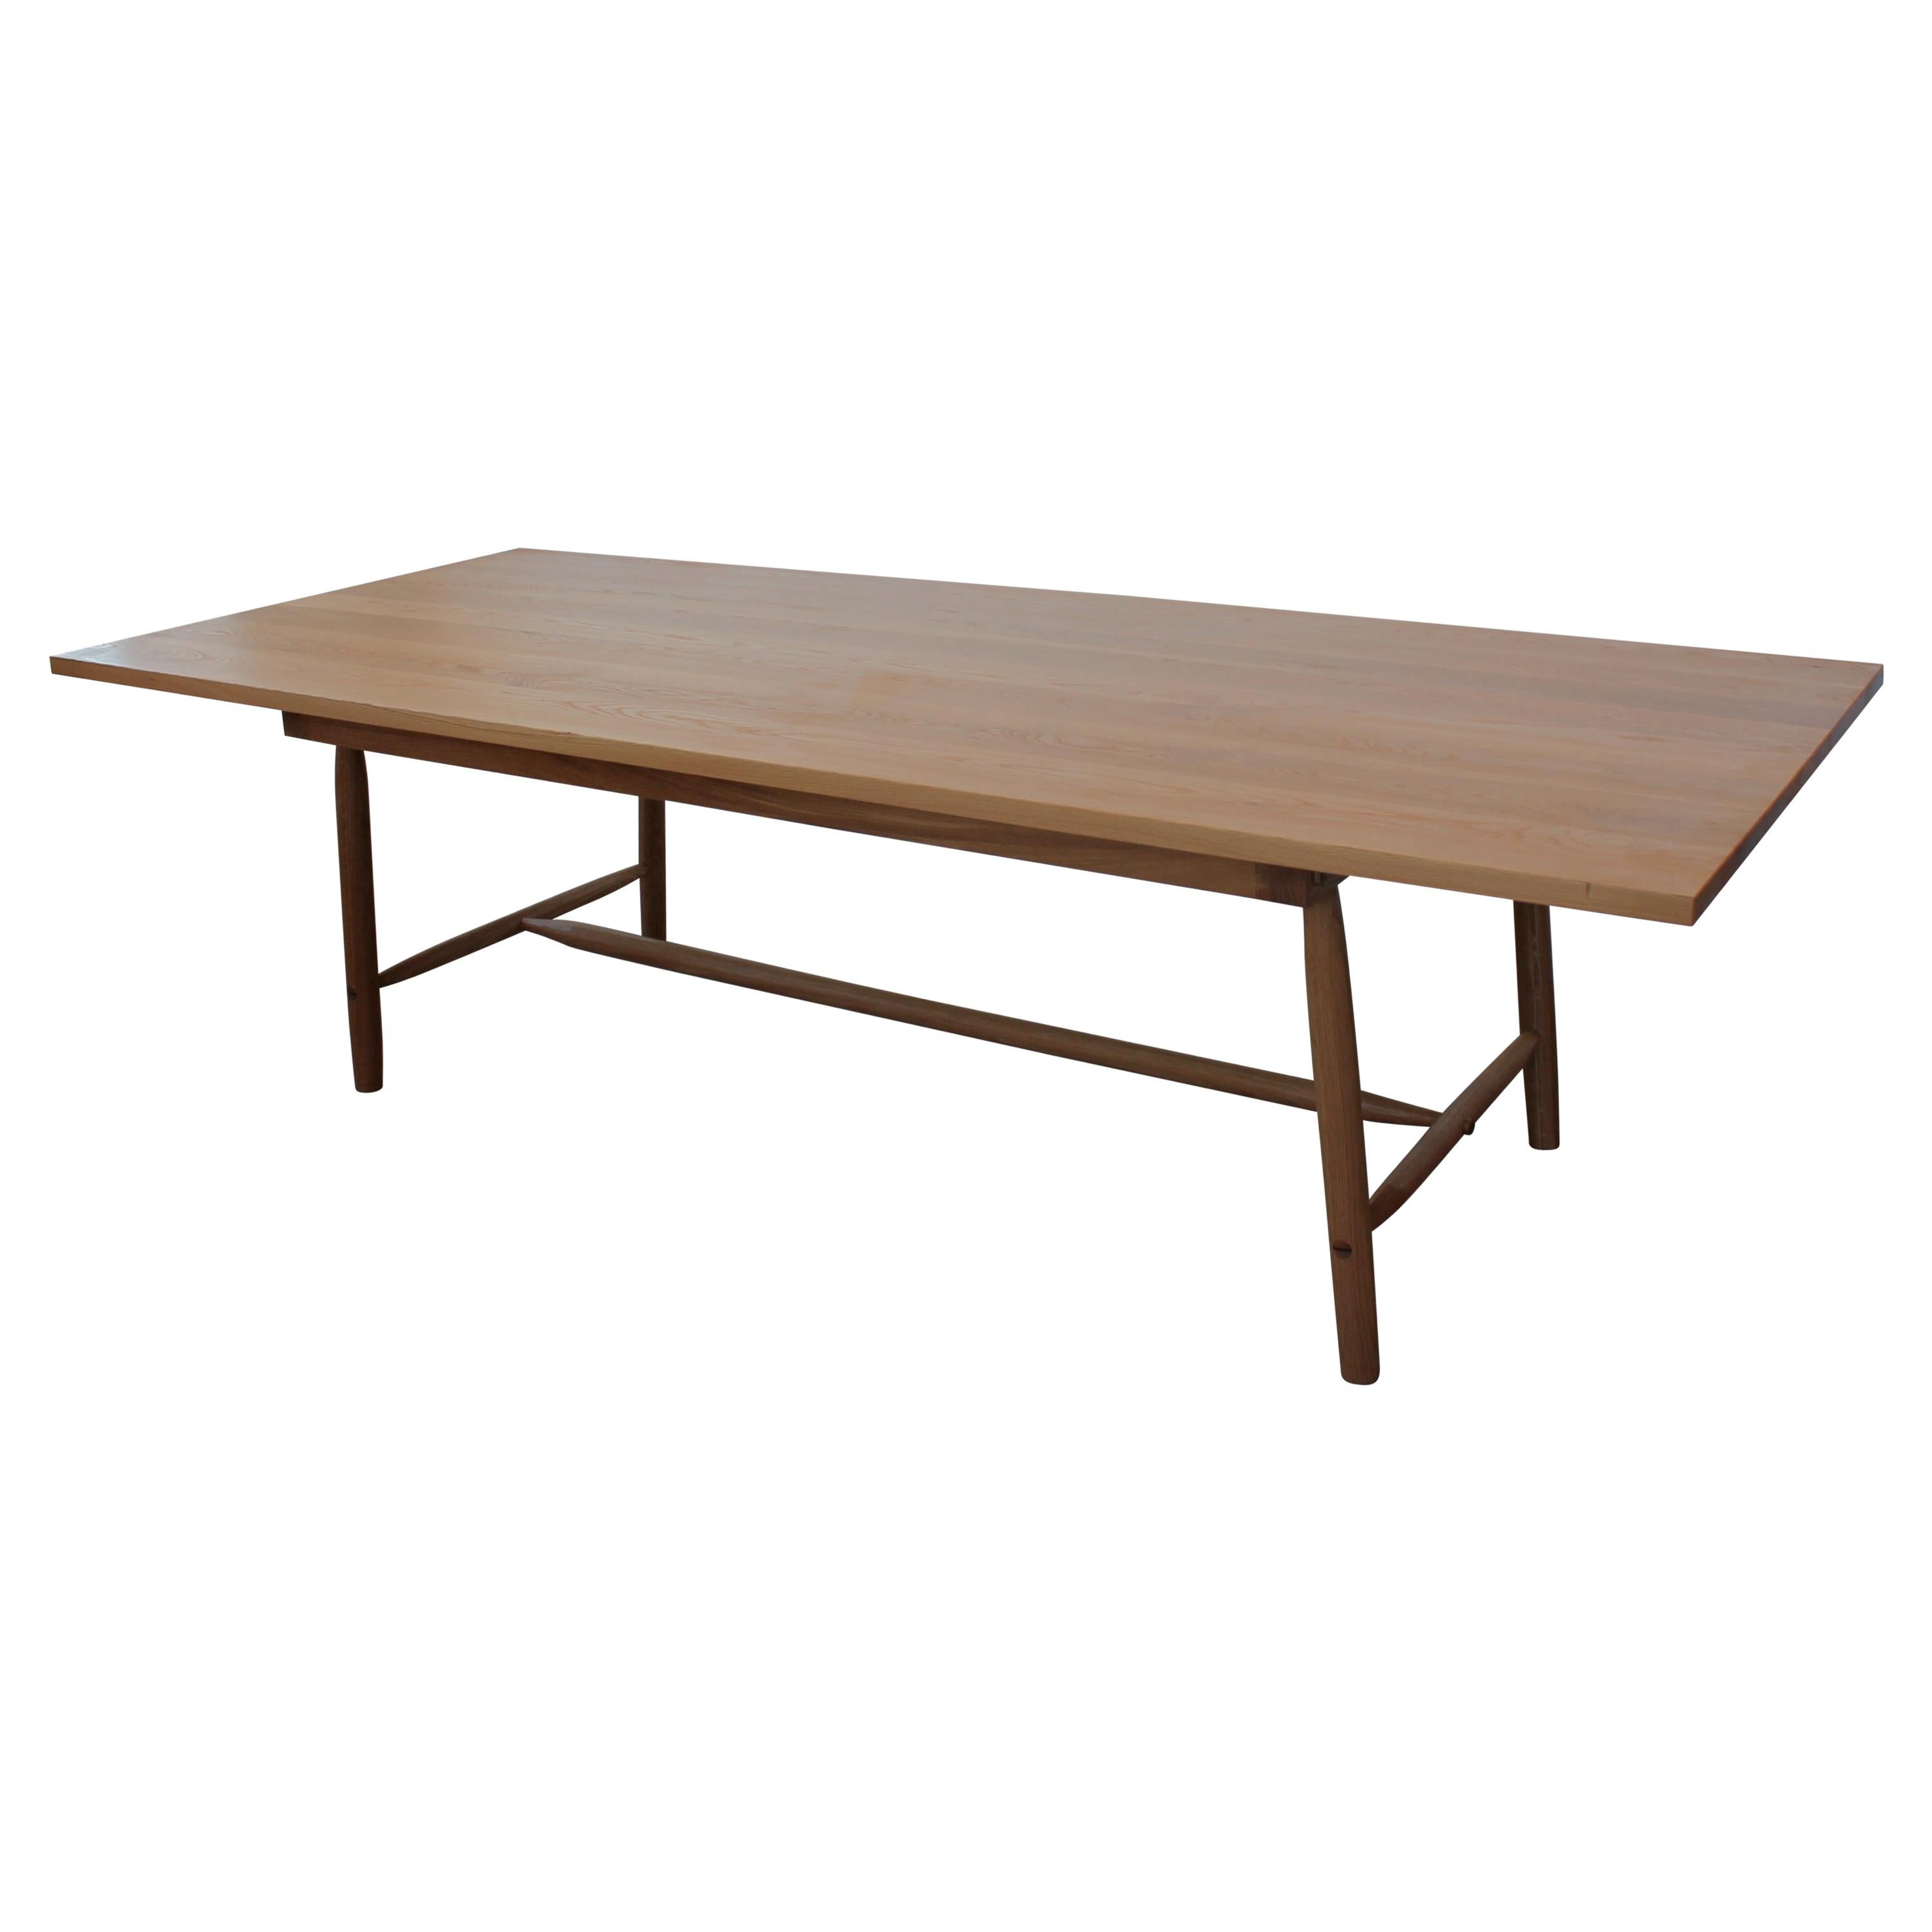 Misterioso Dining Table in White Oak with Hand Shaped Base